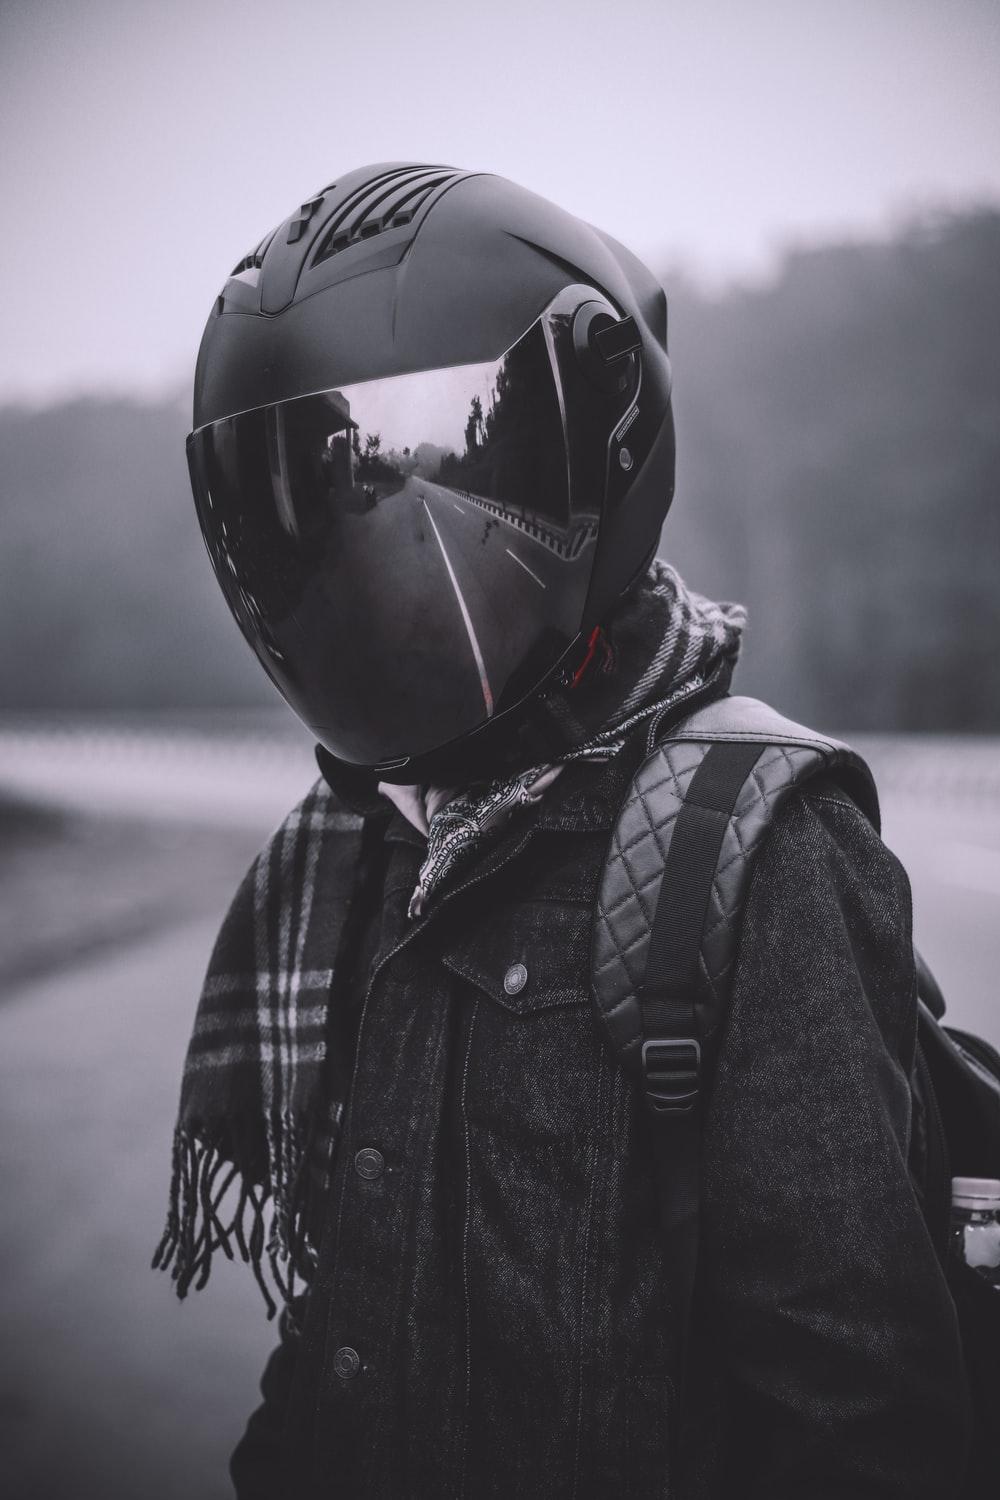 Helmet Picture [HD]. Download Free Image